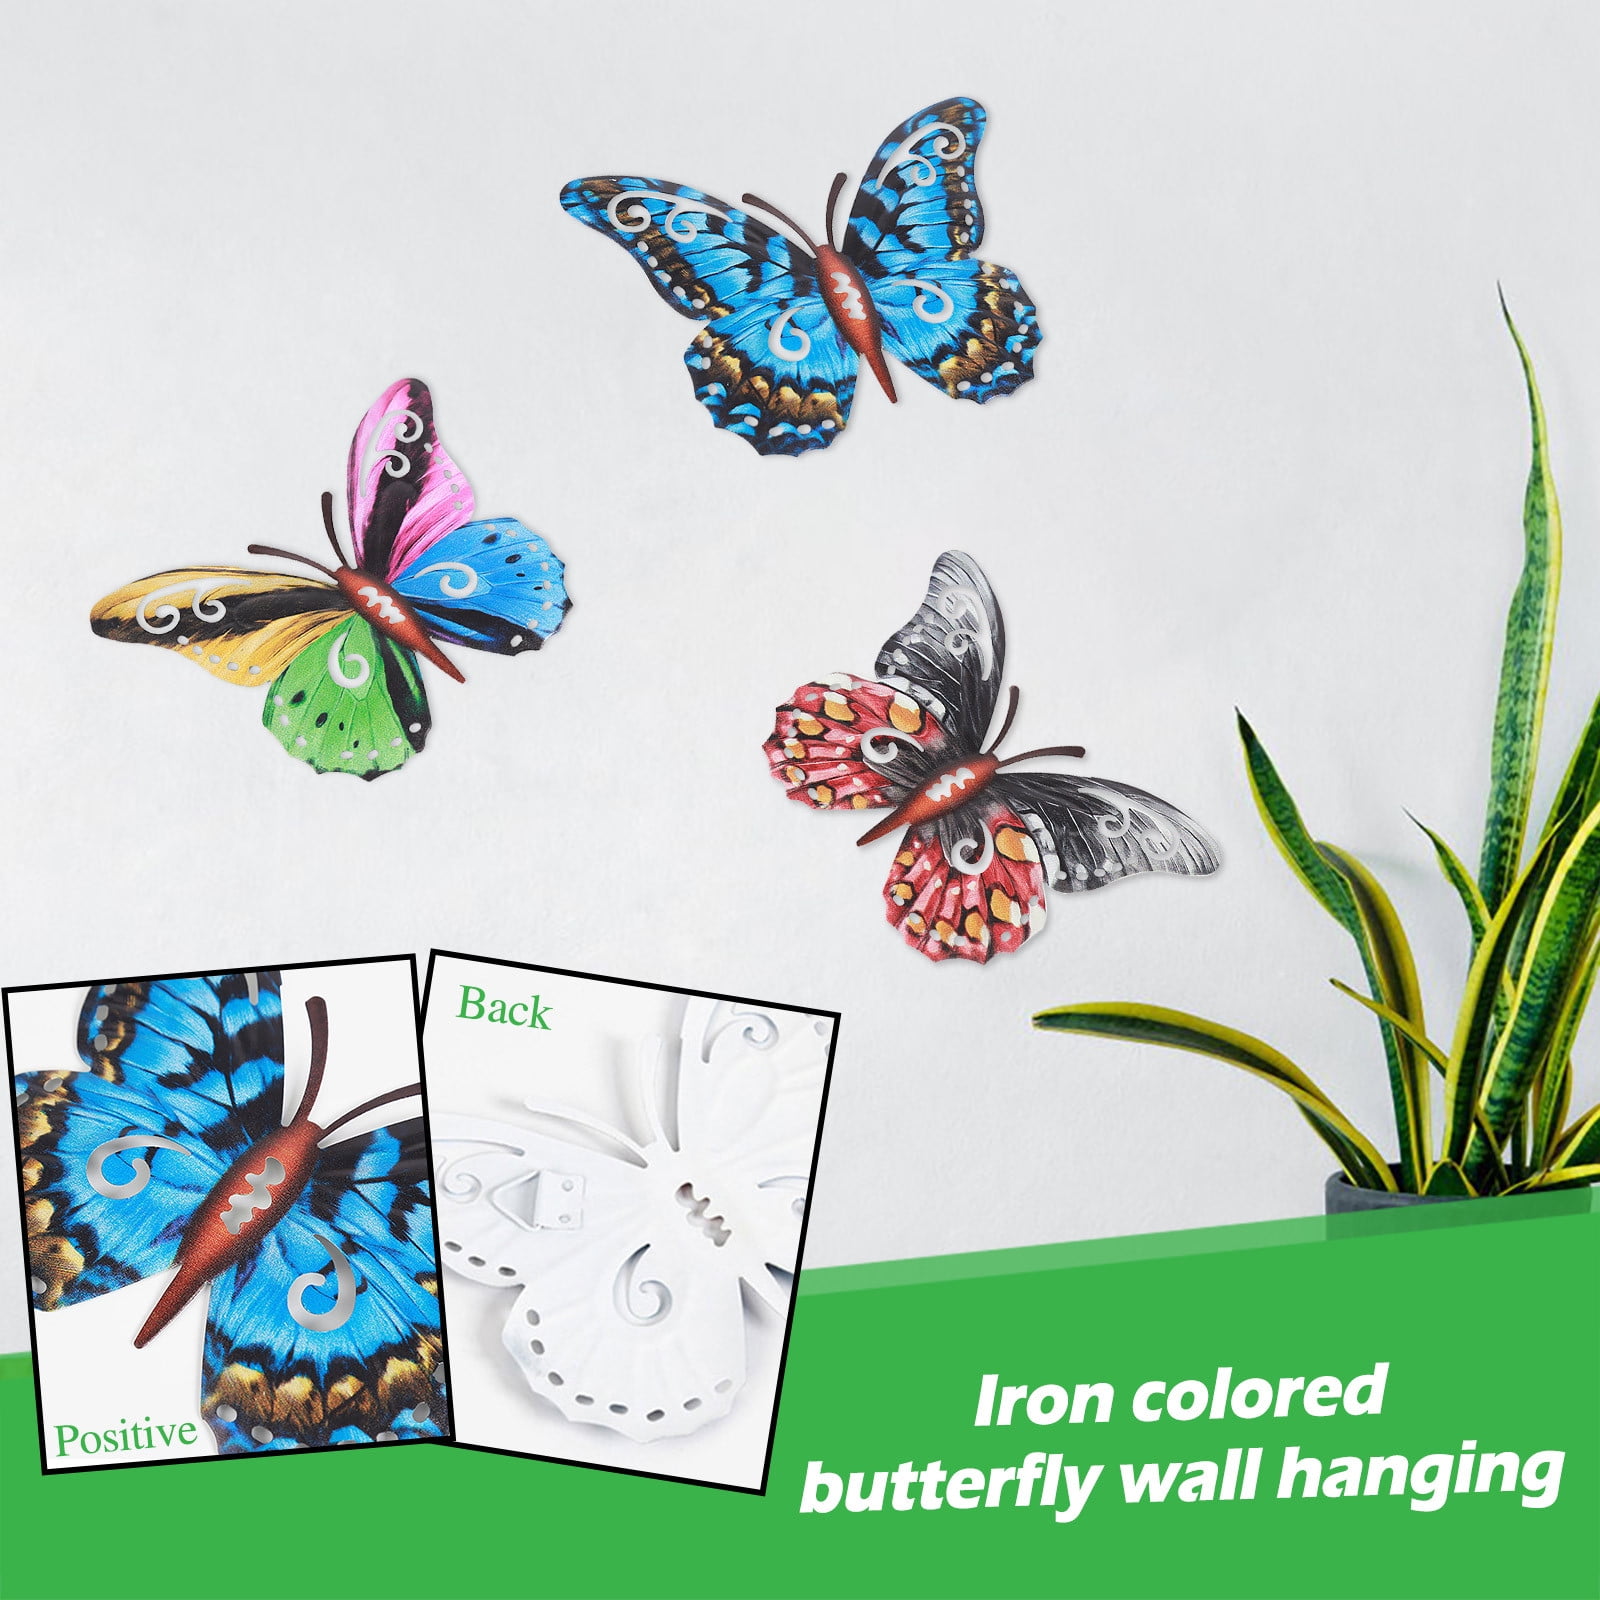 3 Packs Metal Butterfly Wall Art Inspirational Wall Decor Sculpture Hanging for Indoor and Outdoor